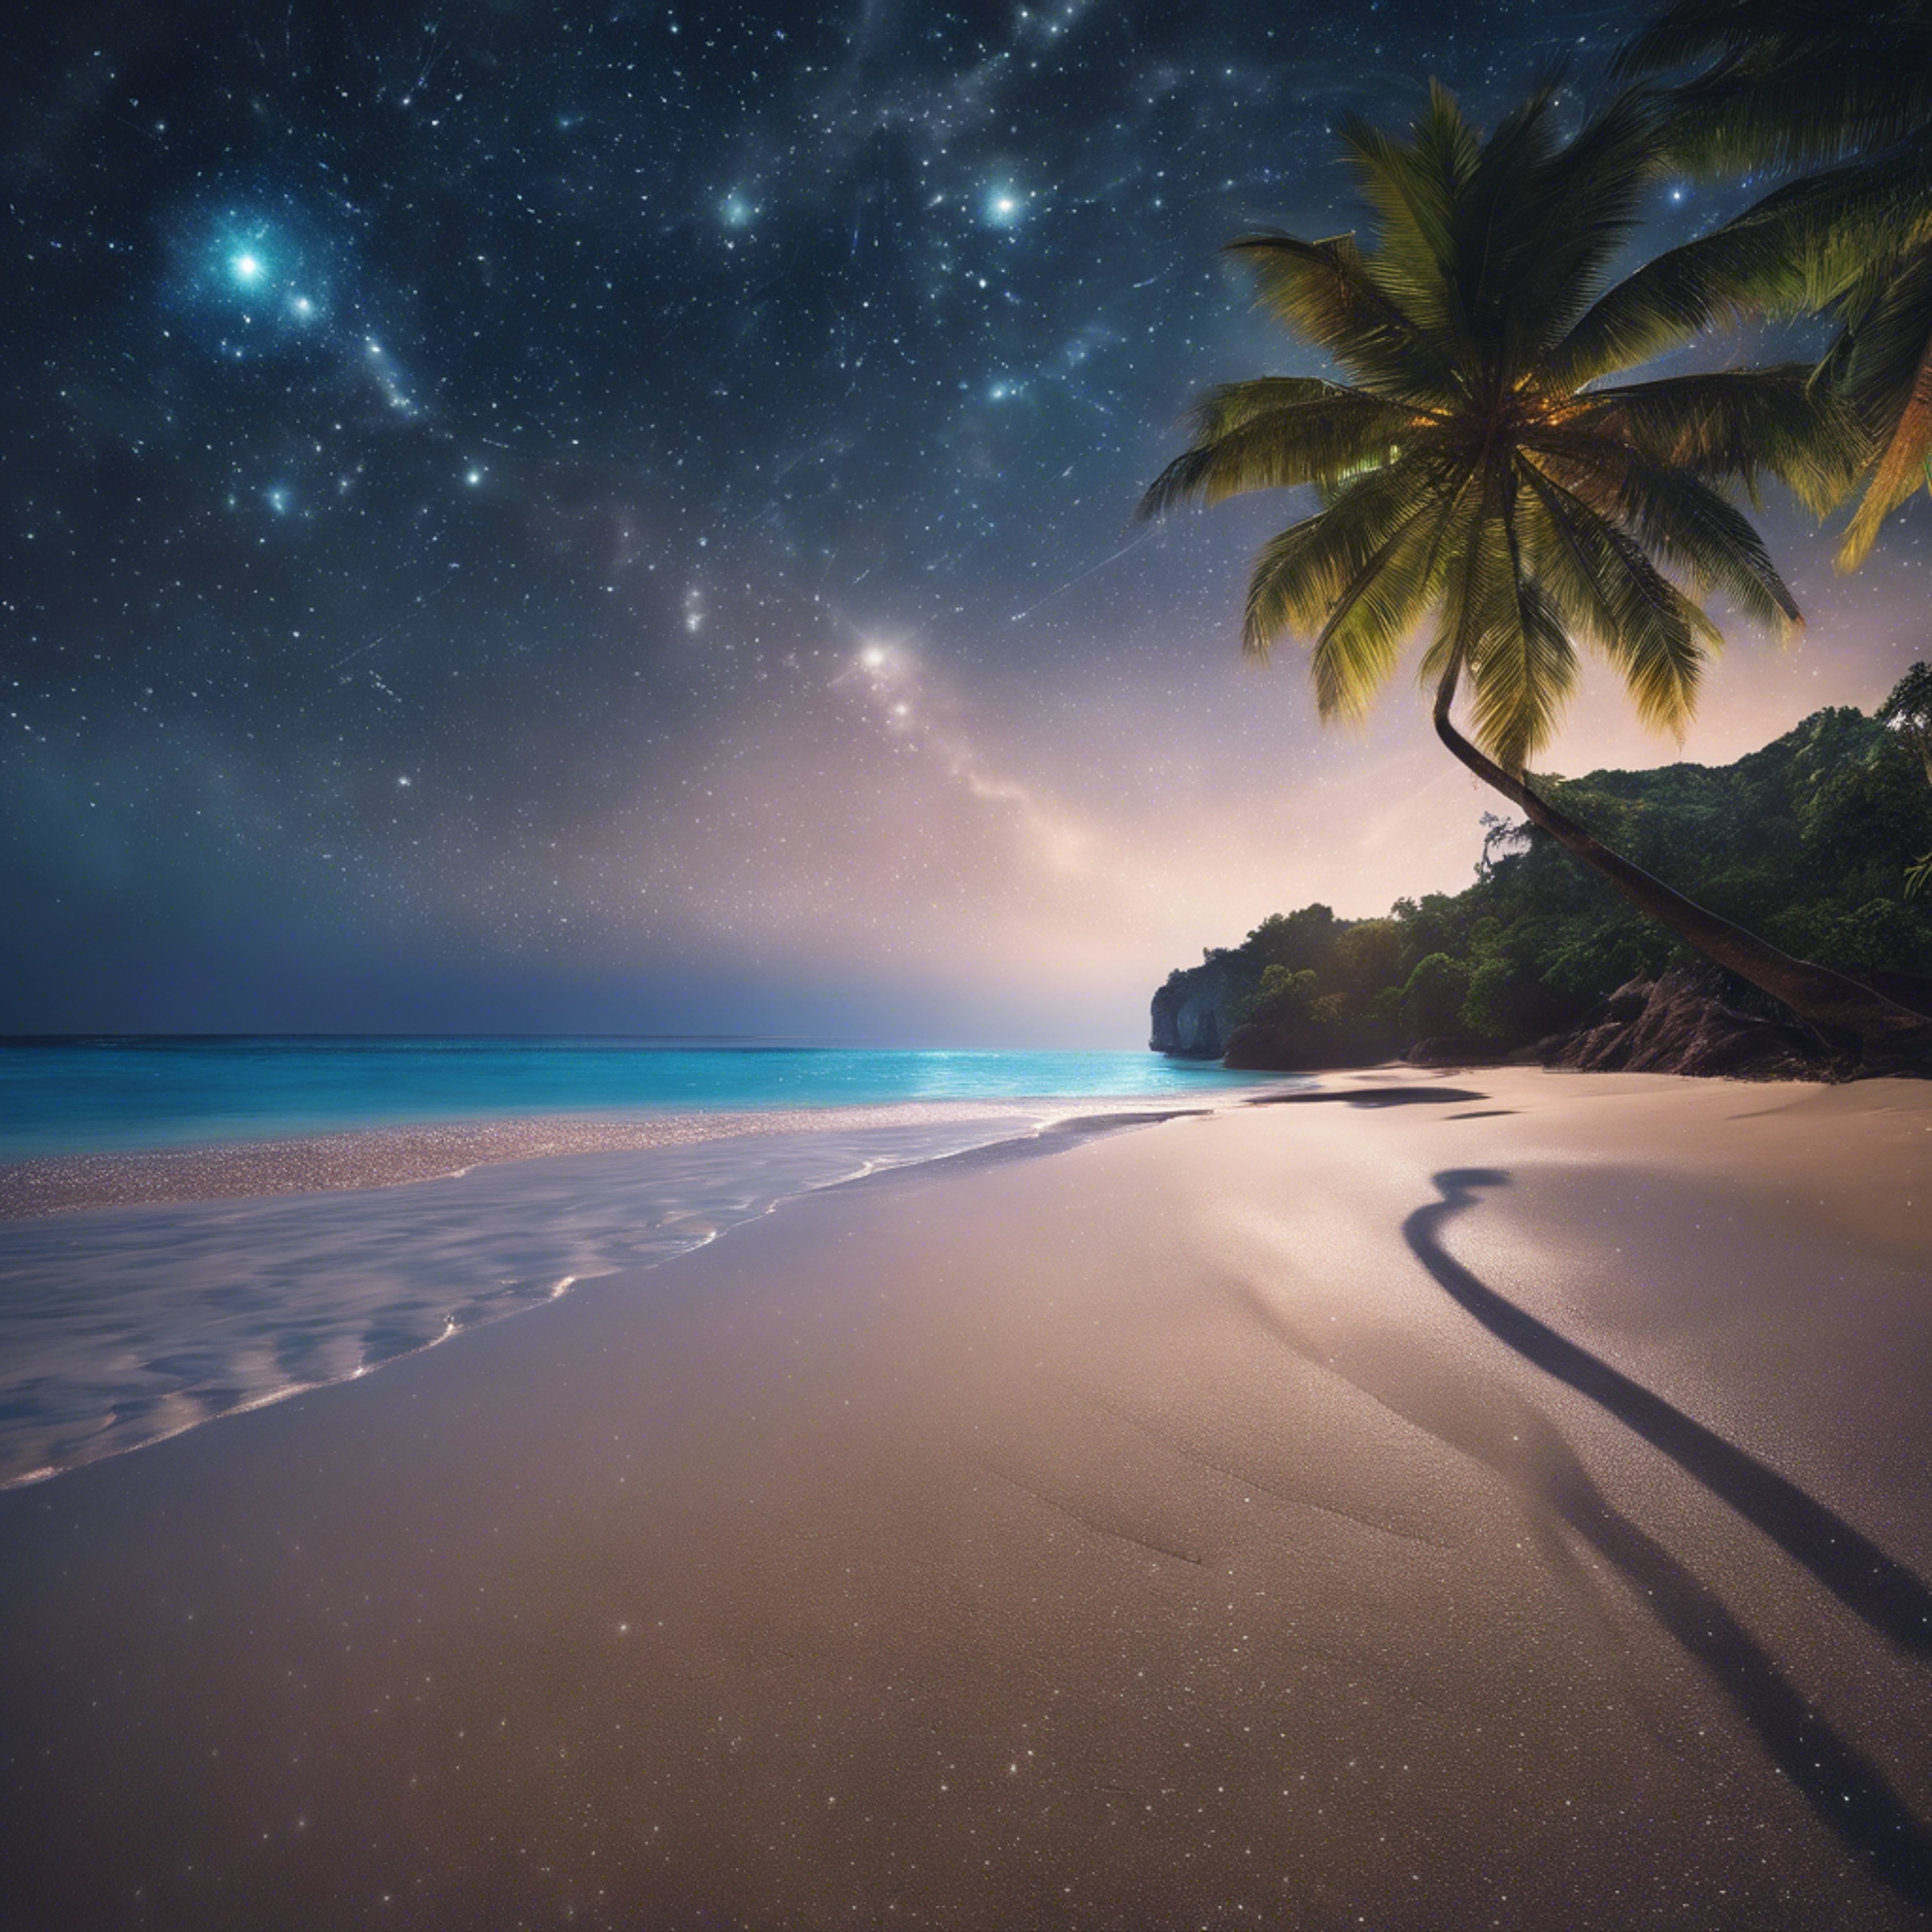 Gleaming stars encrusted in the night sky above a tranquil tropical beach. Tapet[e4d213f7e6244d2f8918]